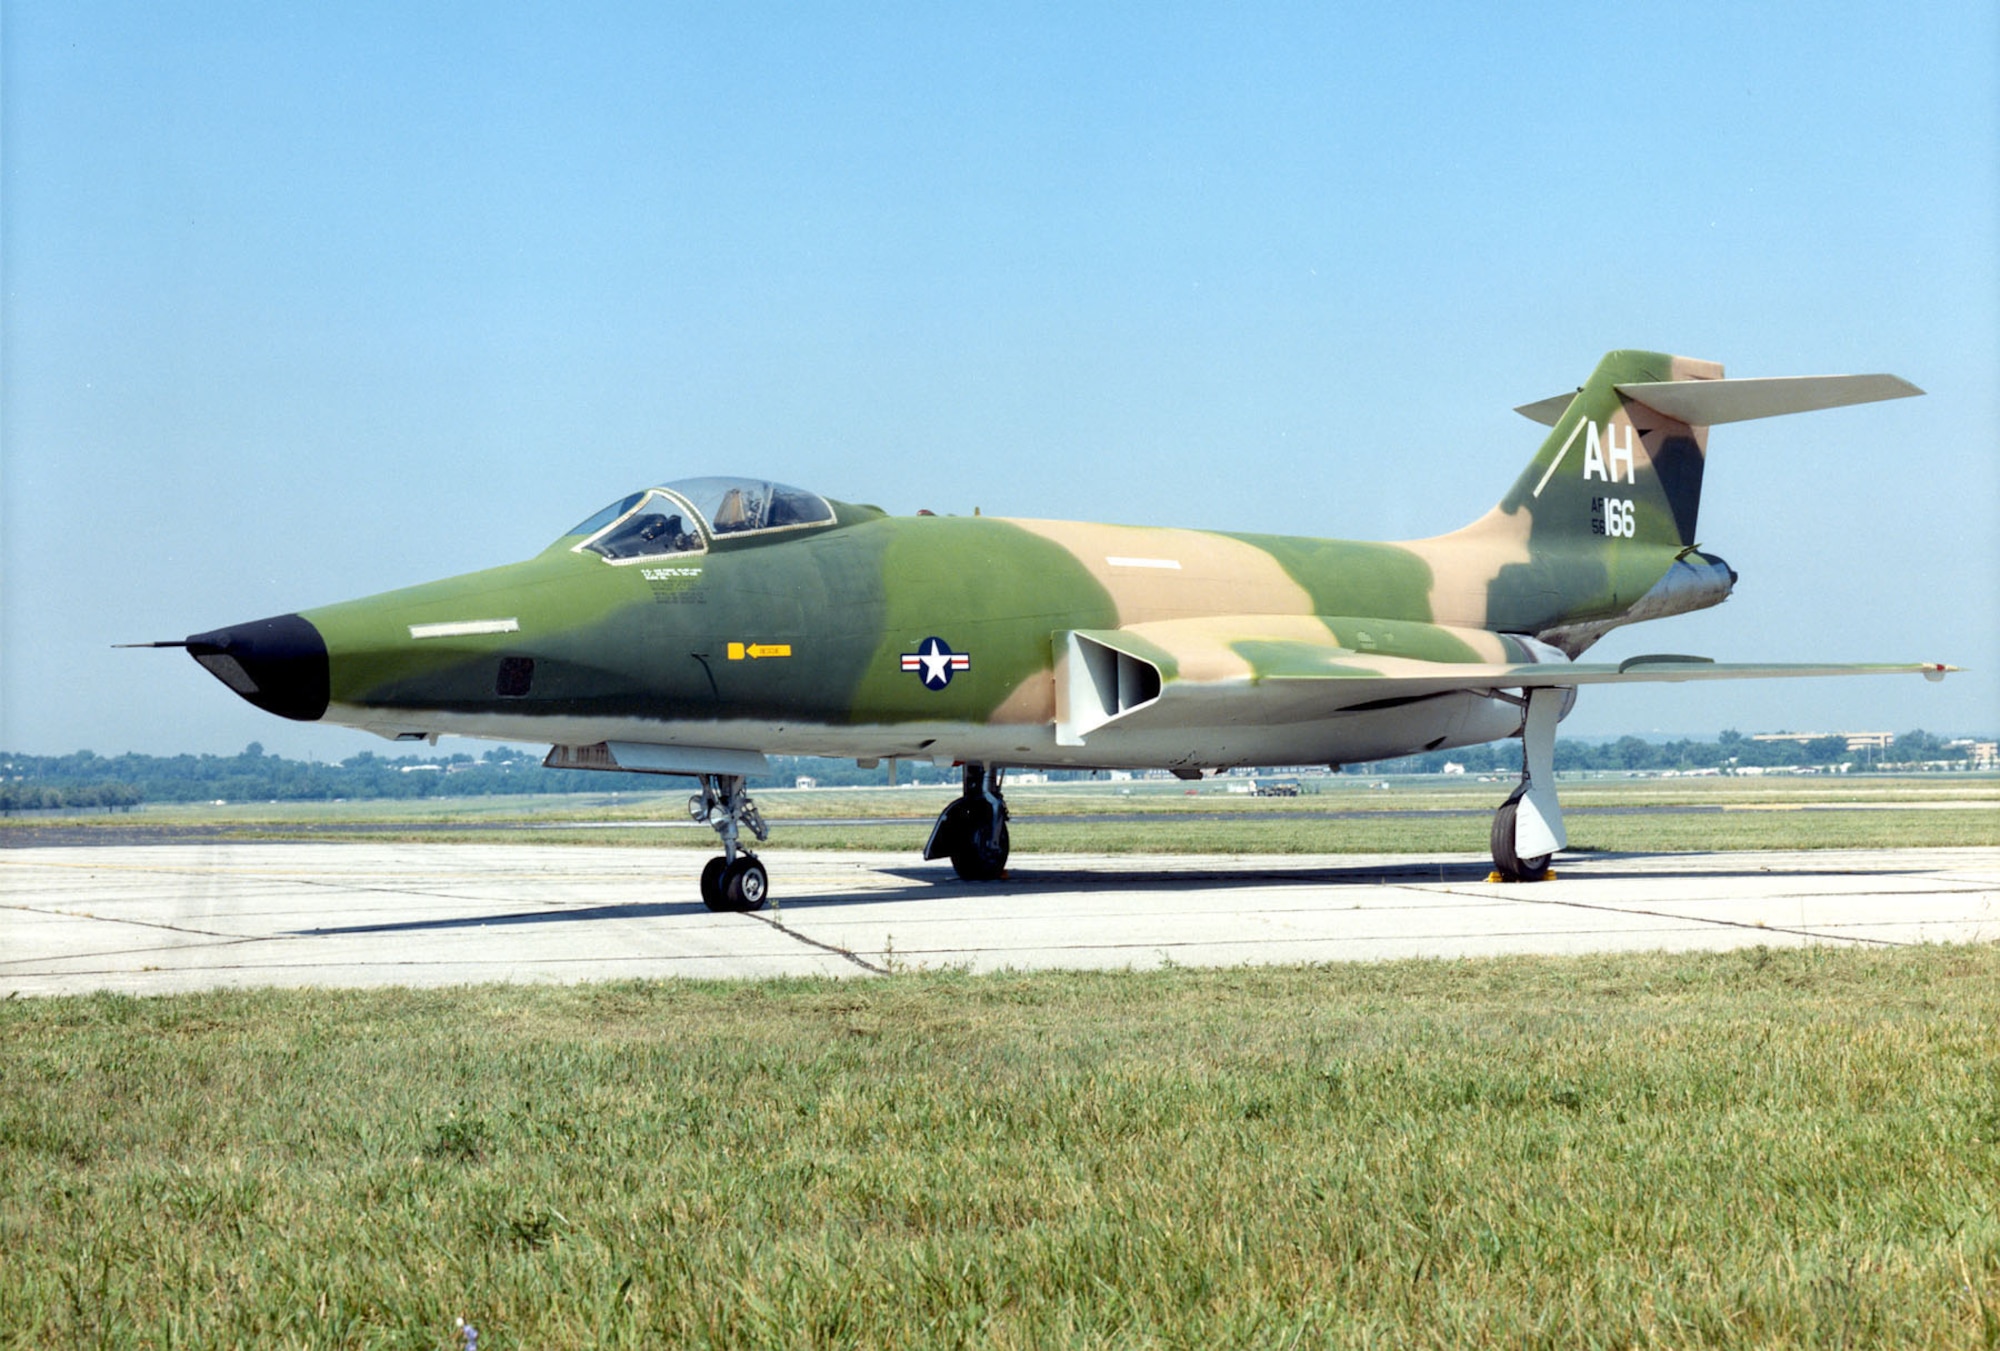 DAYTON, Ohio -- McDonnell RF-101C Voodoo at the National Museum of the United States Air Force. (U.S. Air Force photo)